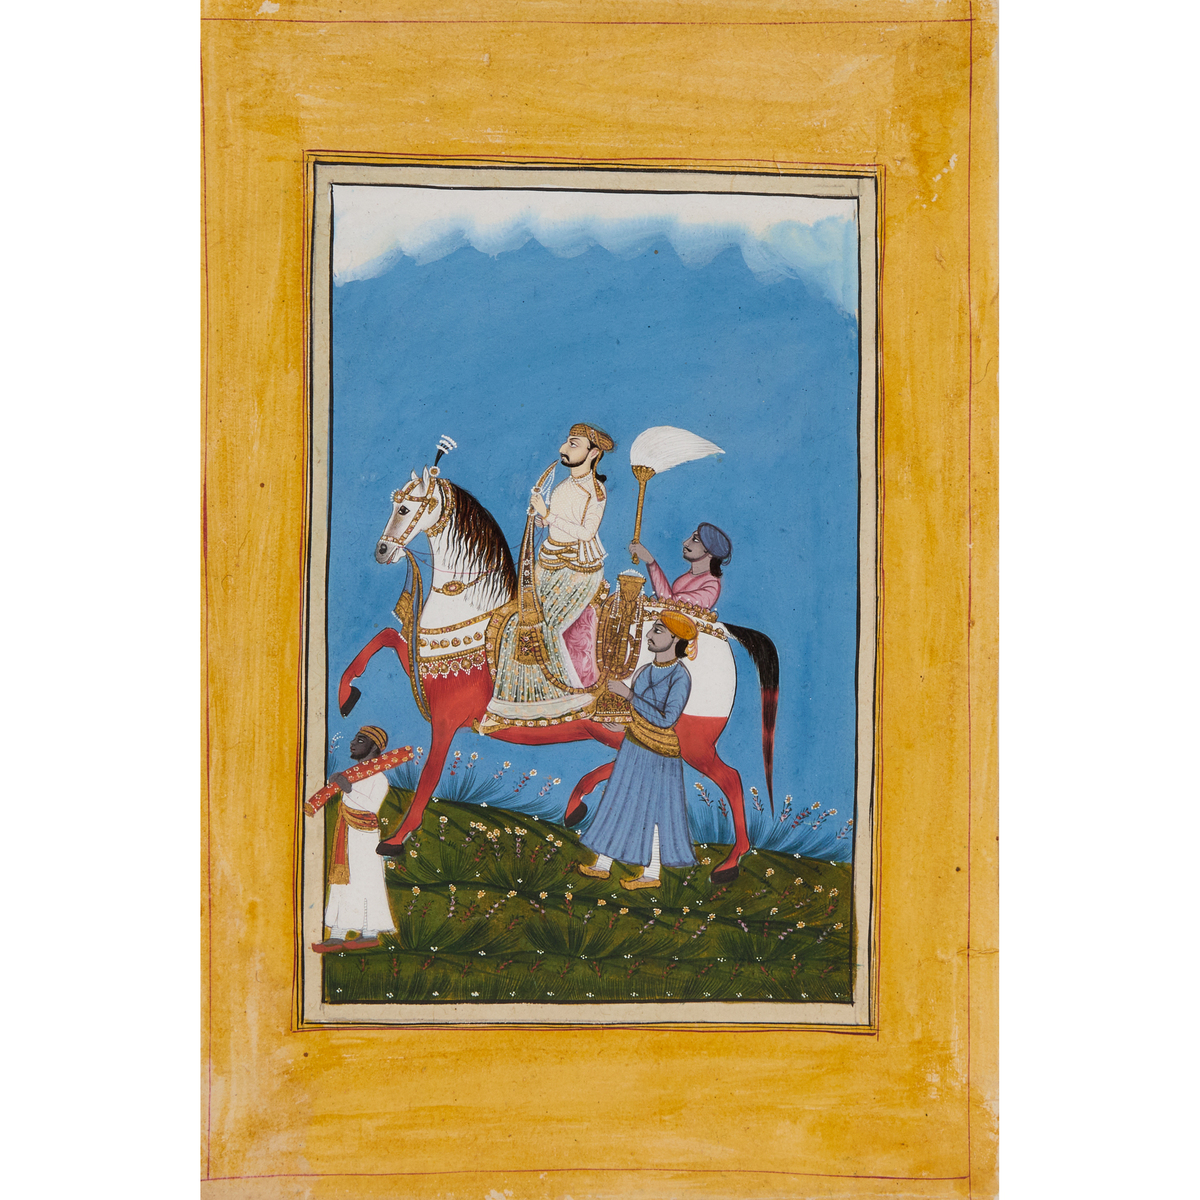 An Equestrian Portrait of a Prince, Rajasthan, North India, 18th/19th Century, sheet 13 x 8.7 in — 3 - Image 3 of 4